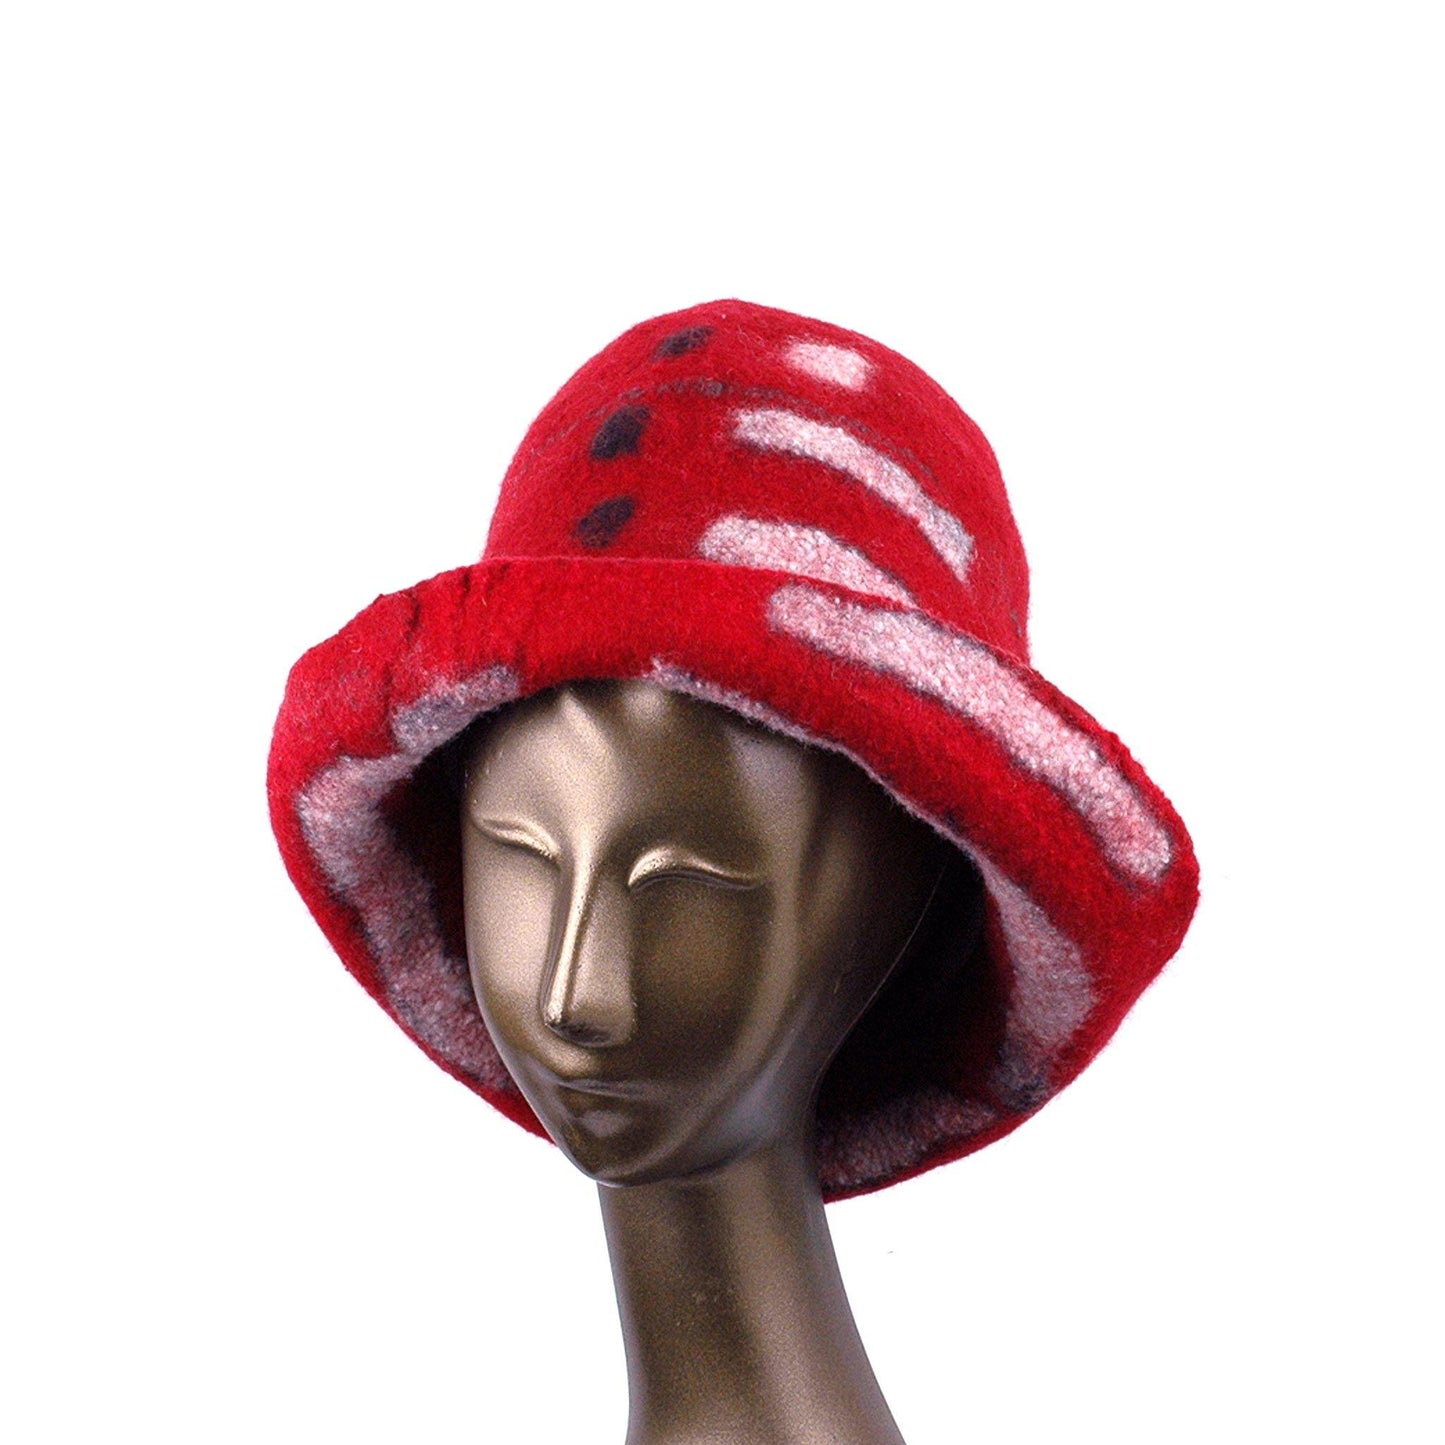 Tall Red and Black Brimmed Hat with Geometric Shapes - front view